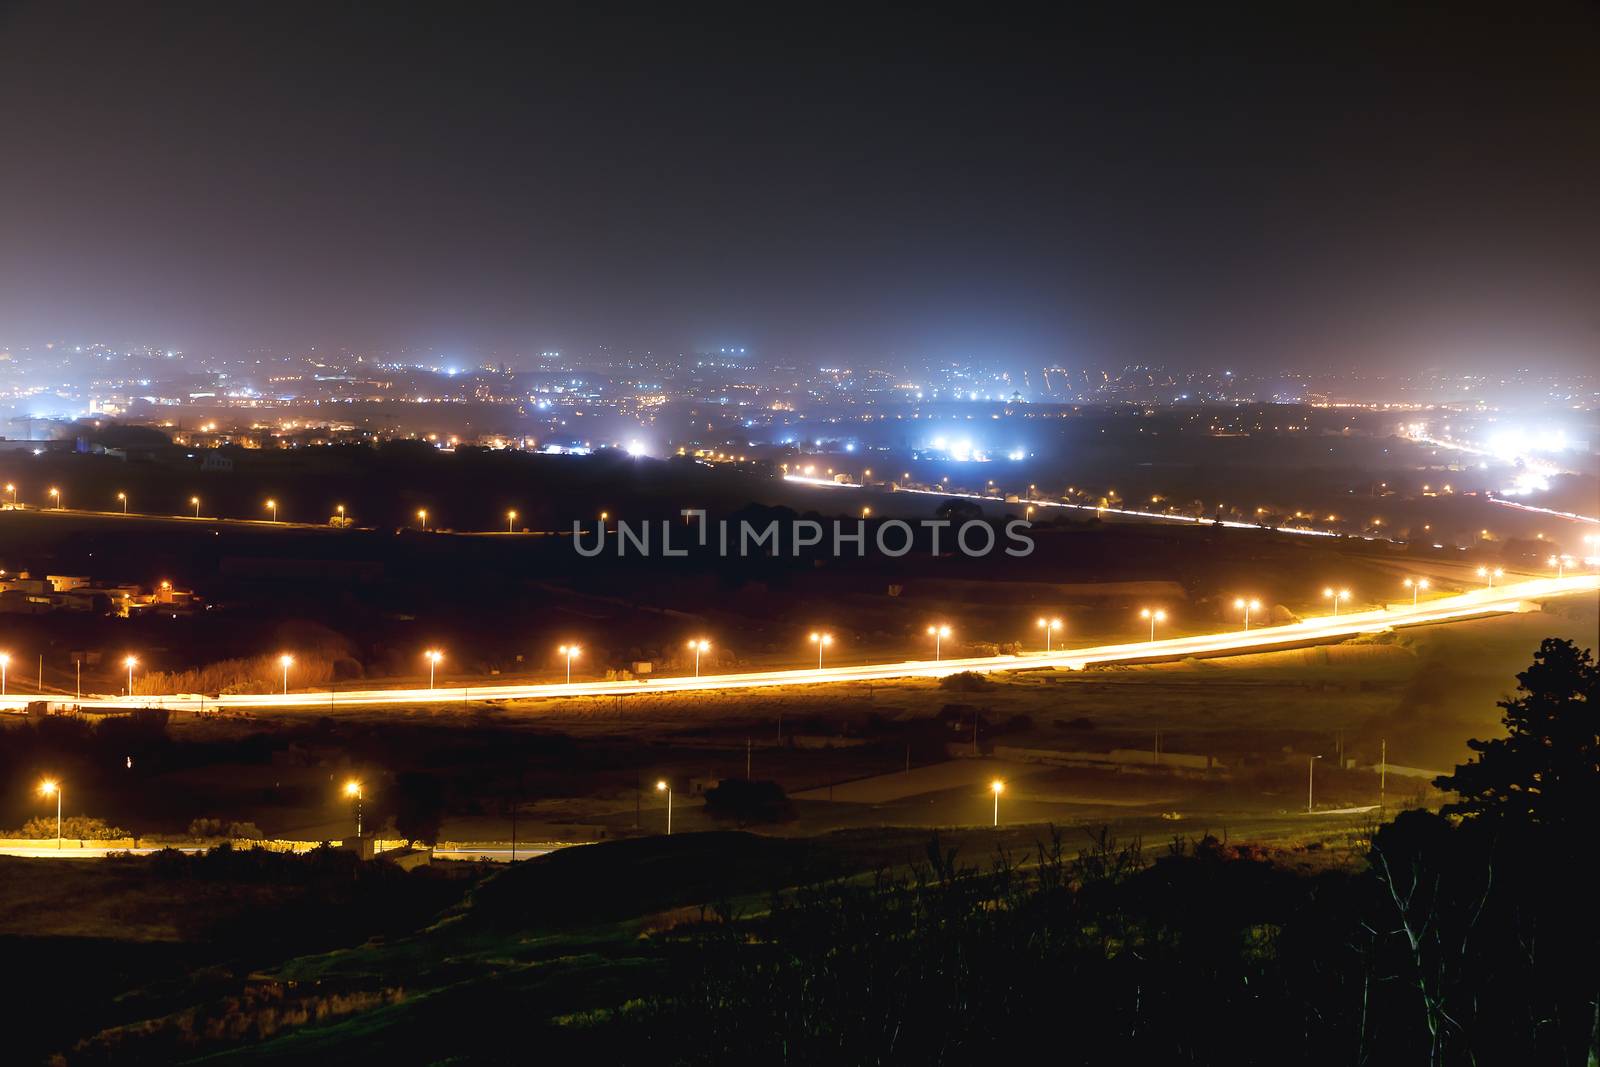 Night panorama view of illuminated roads and grounds around Mdina - old capital of Malta. Shooted with long exposure.